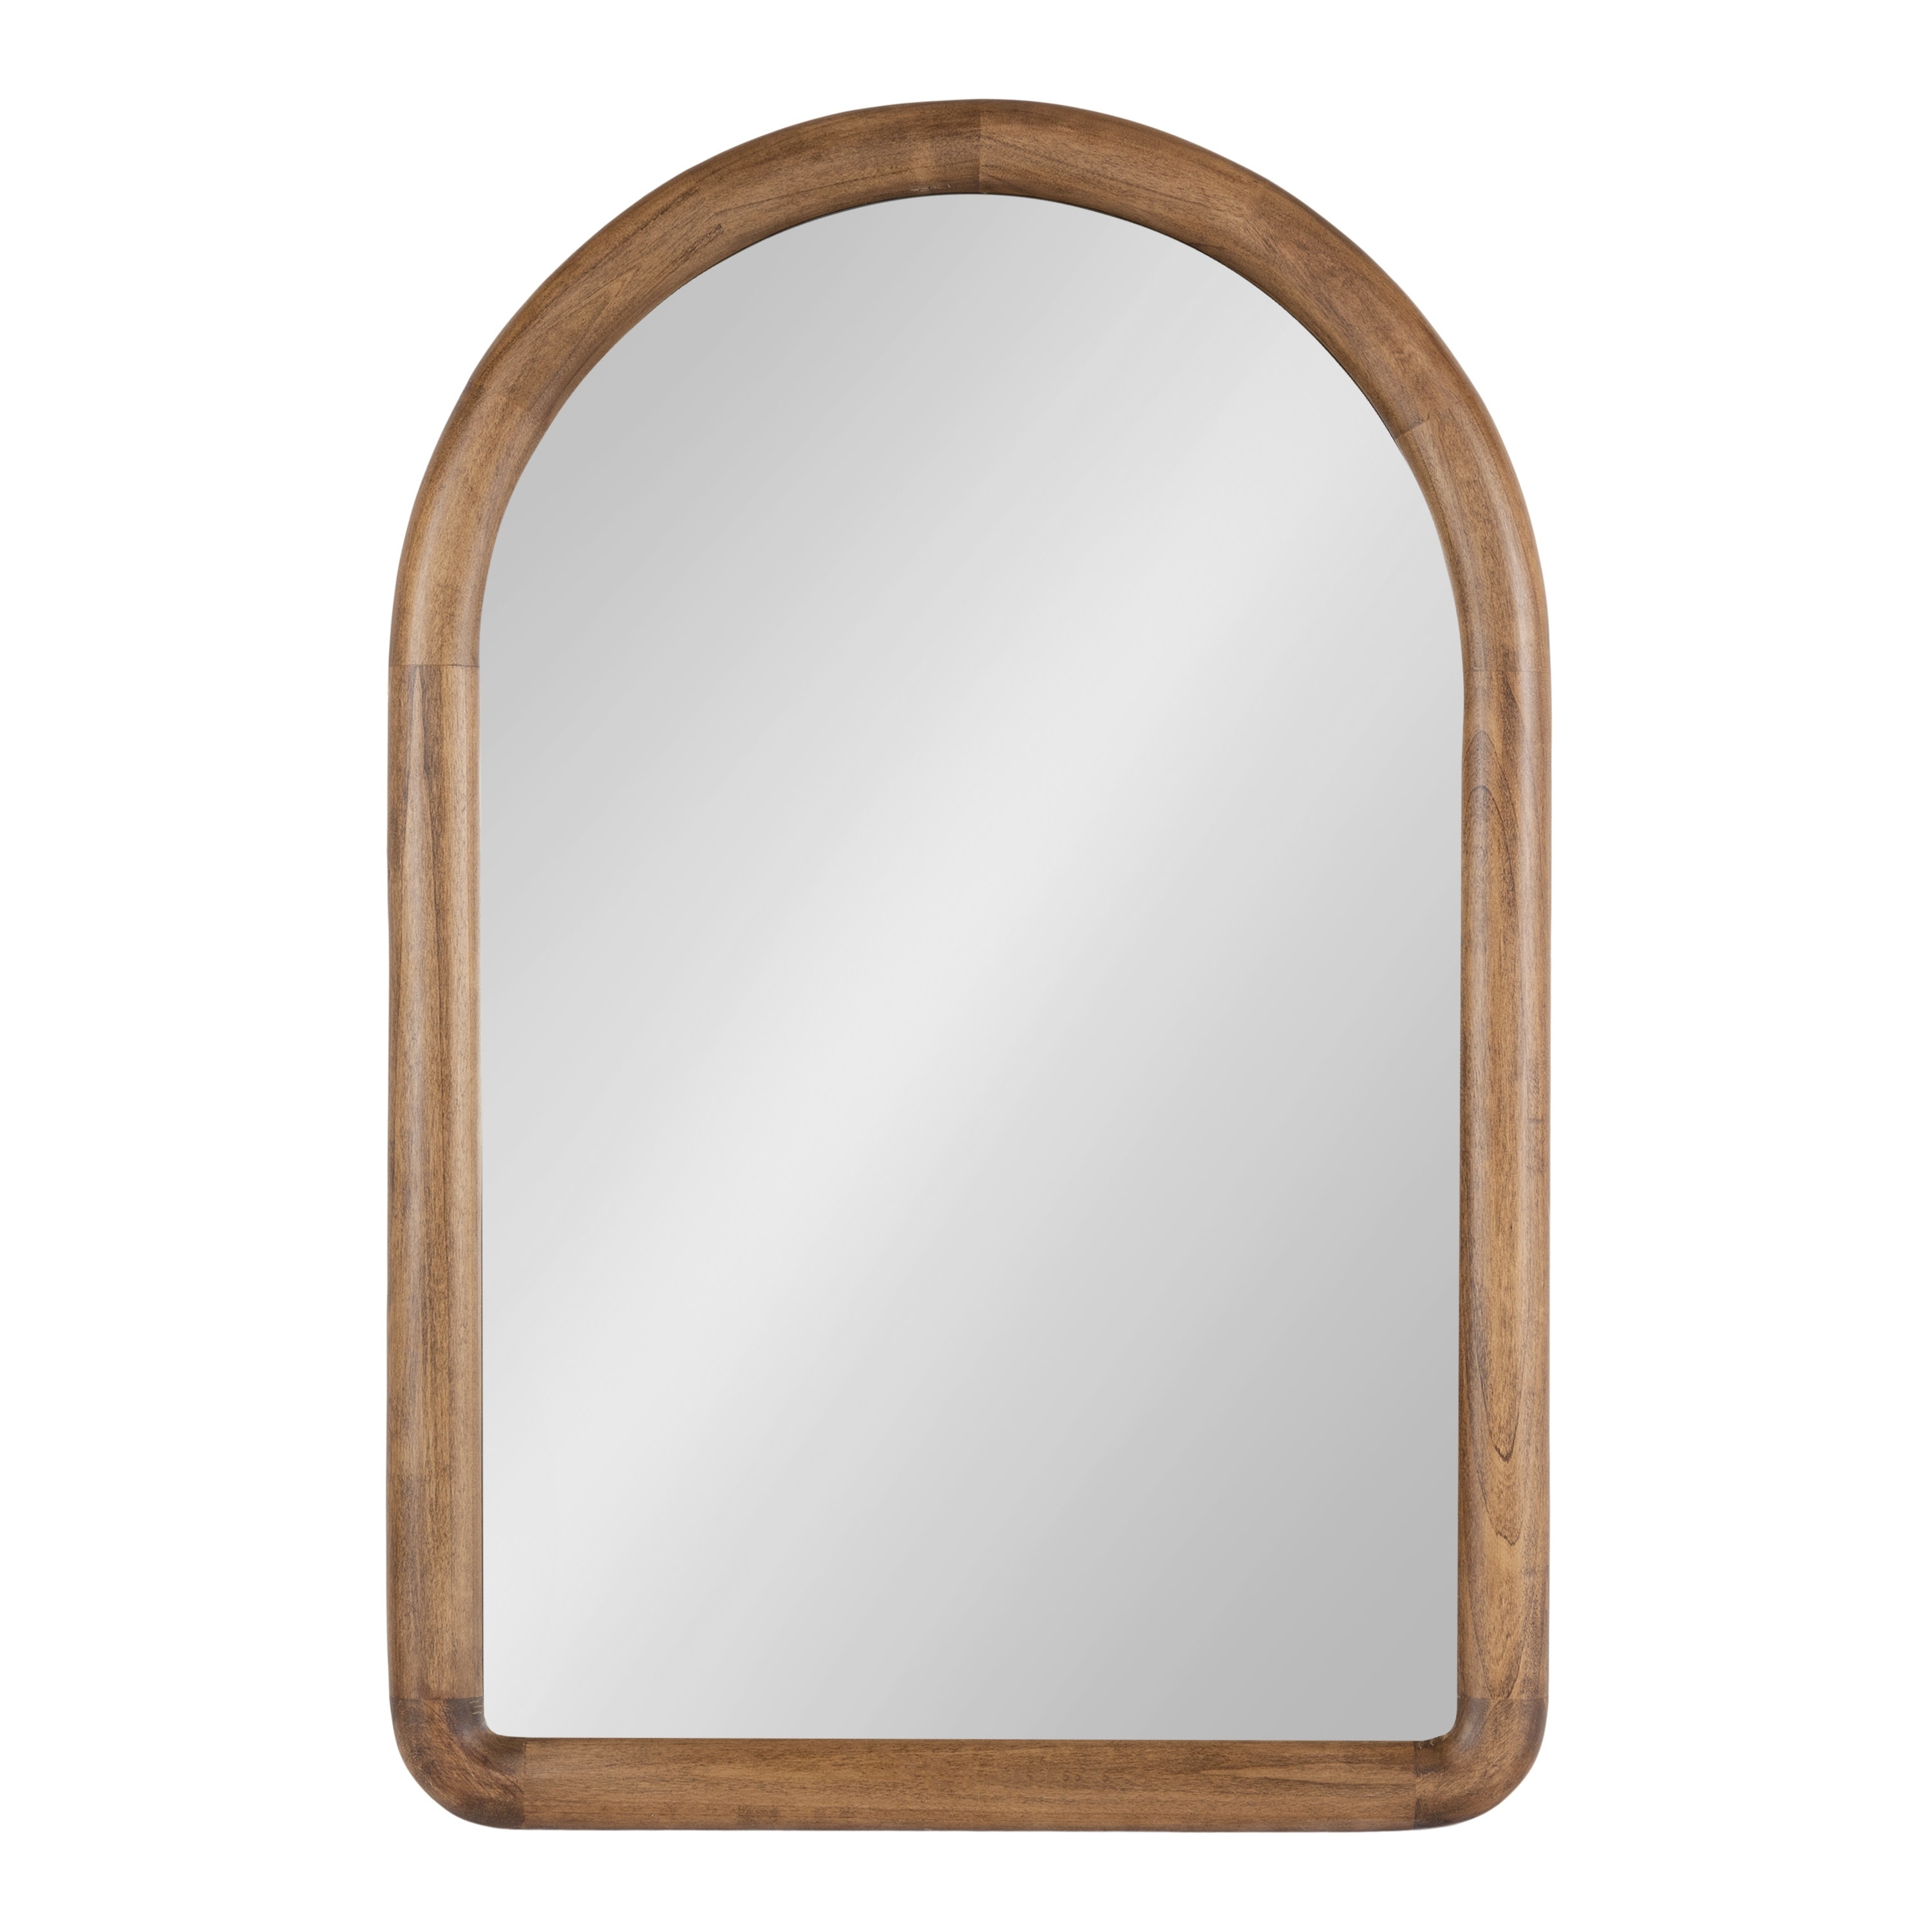 Kate and Laurel Dessa Arched Wall Mirror - 24x36